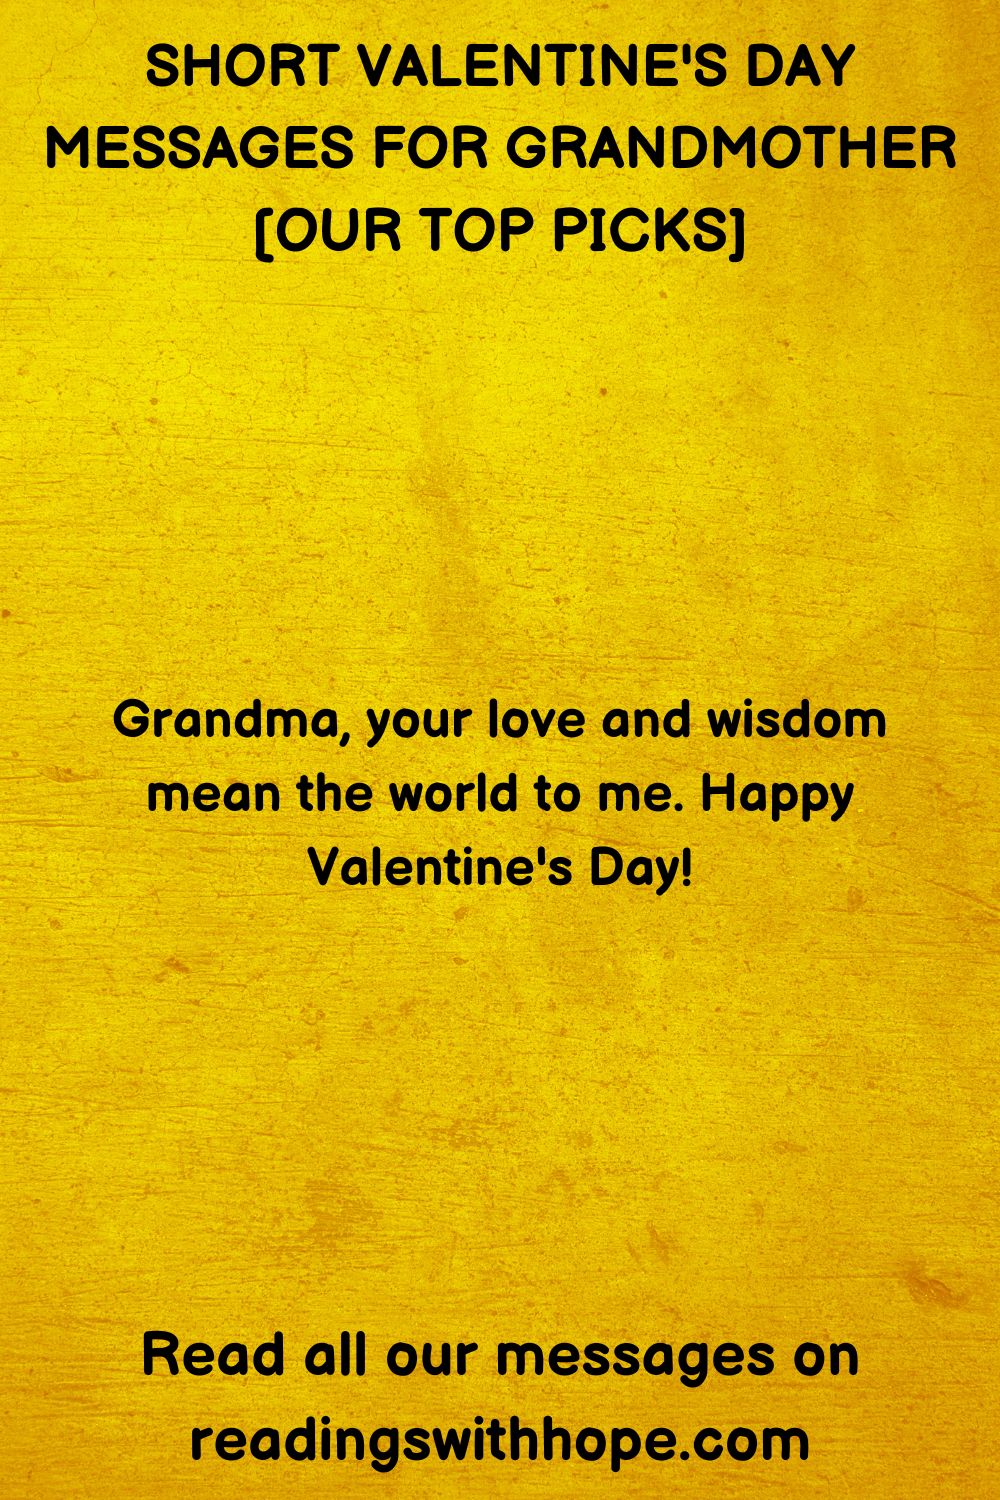 Short Valentine's Day Messages for Grandmother